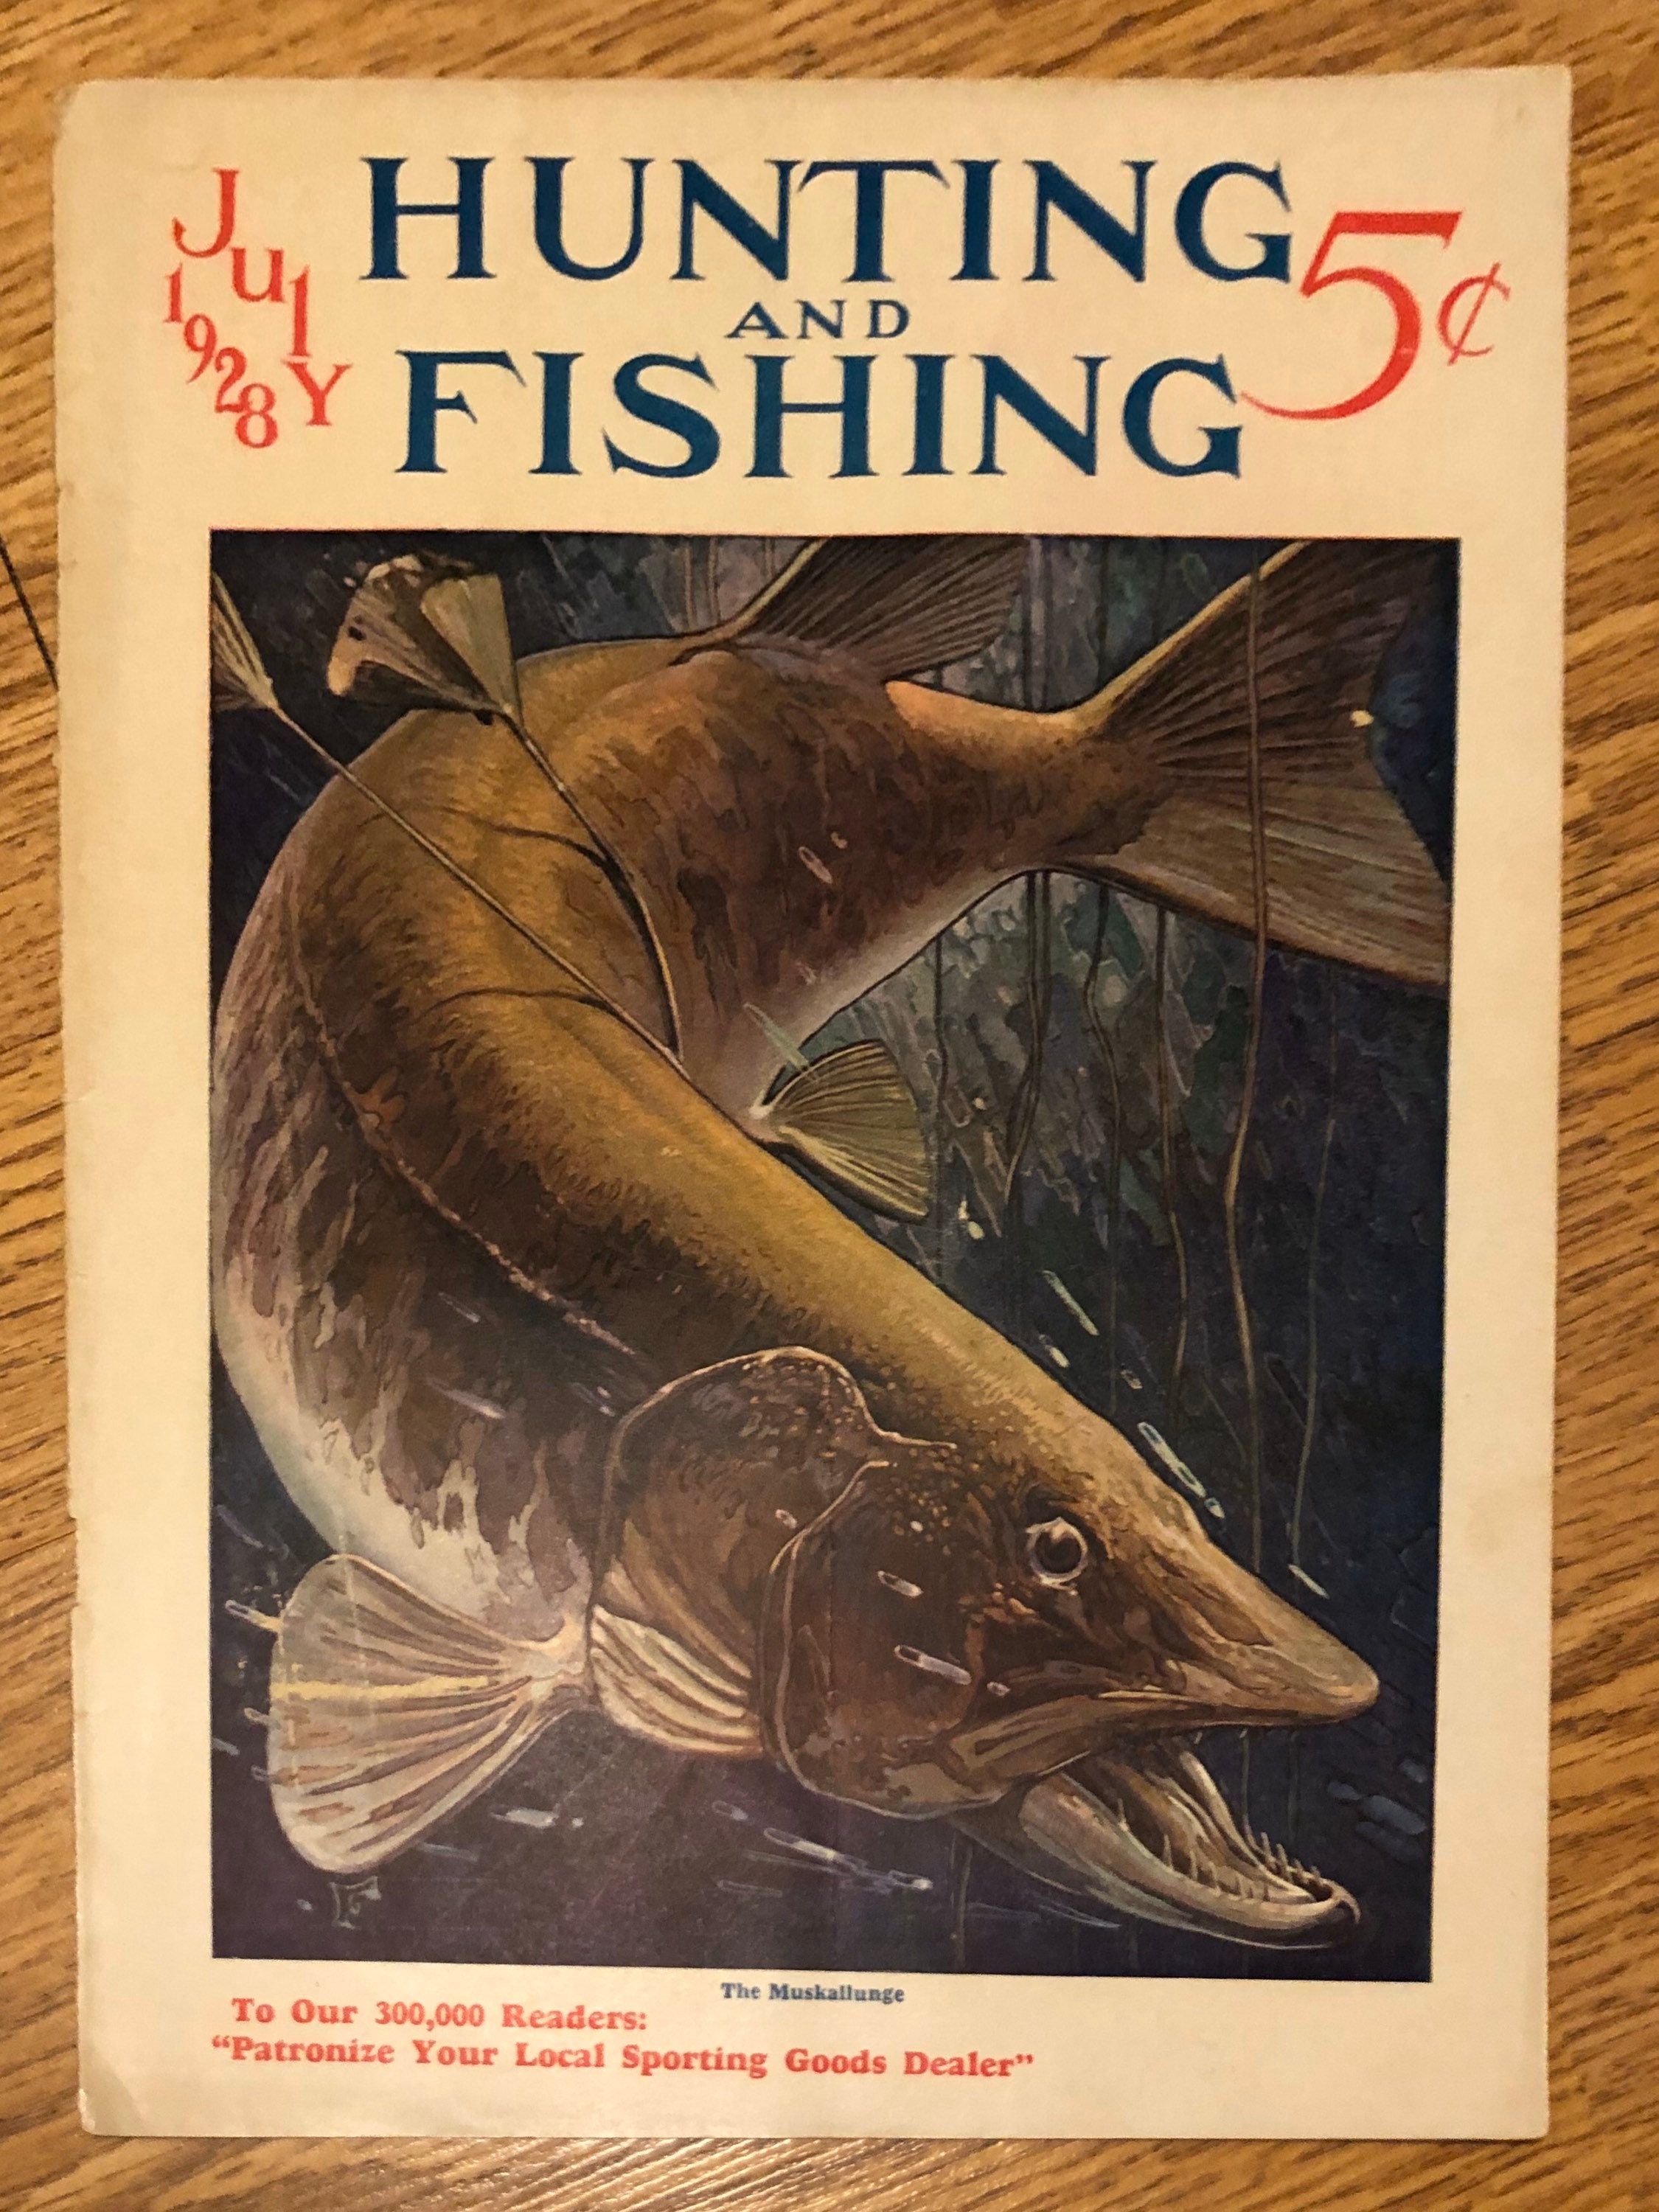 Vintage 1920s Hunting and Fishing Magazine Covers 